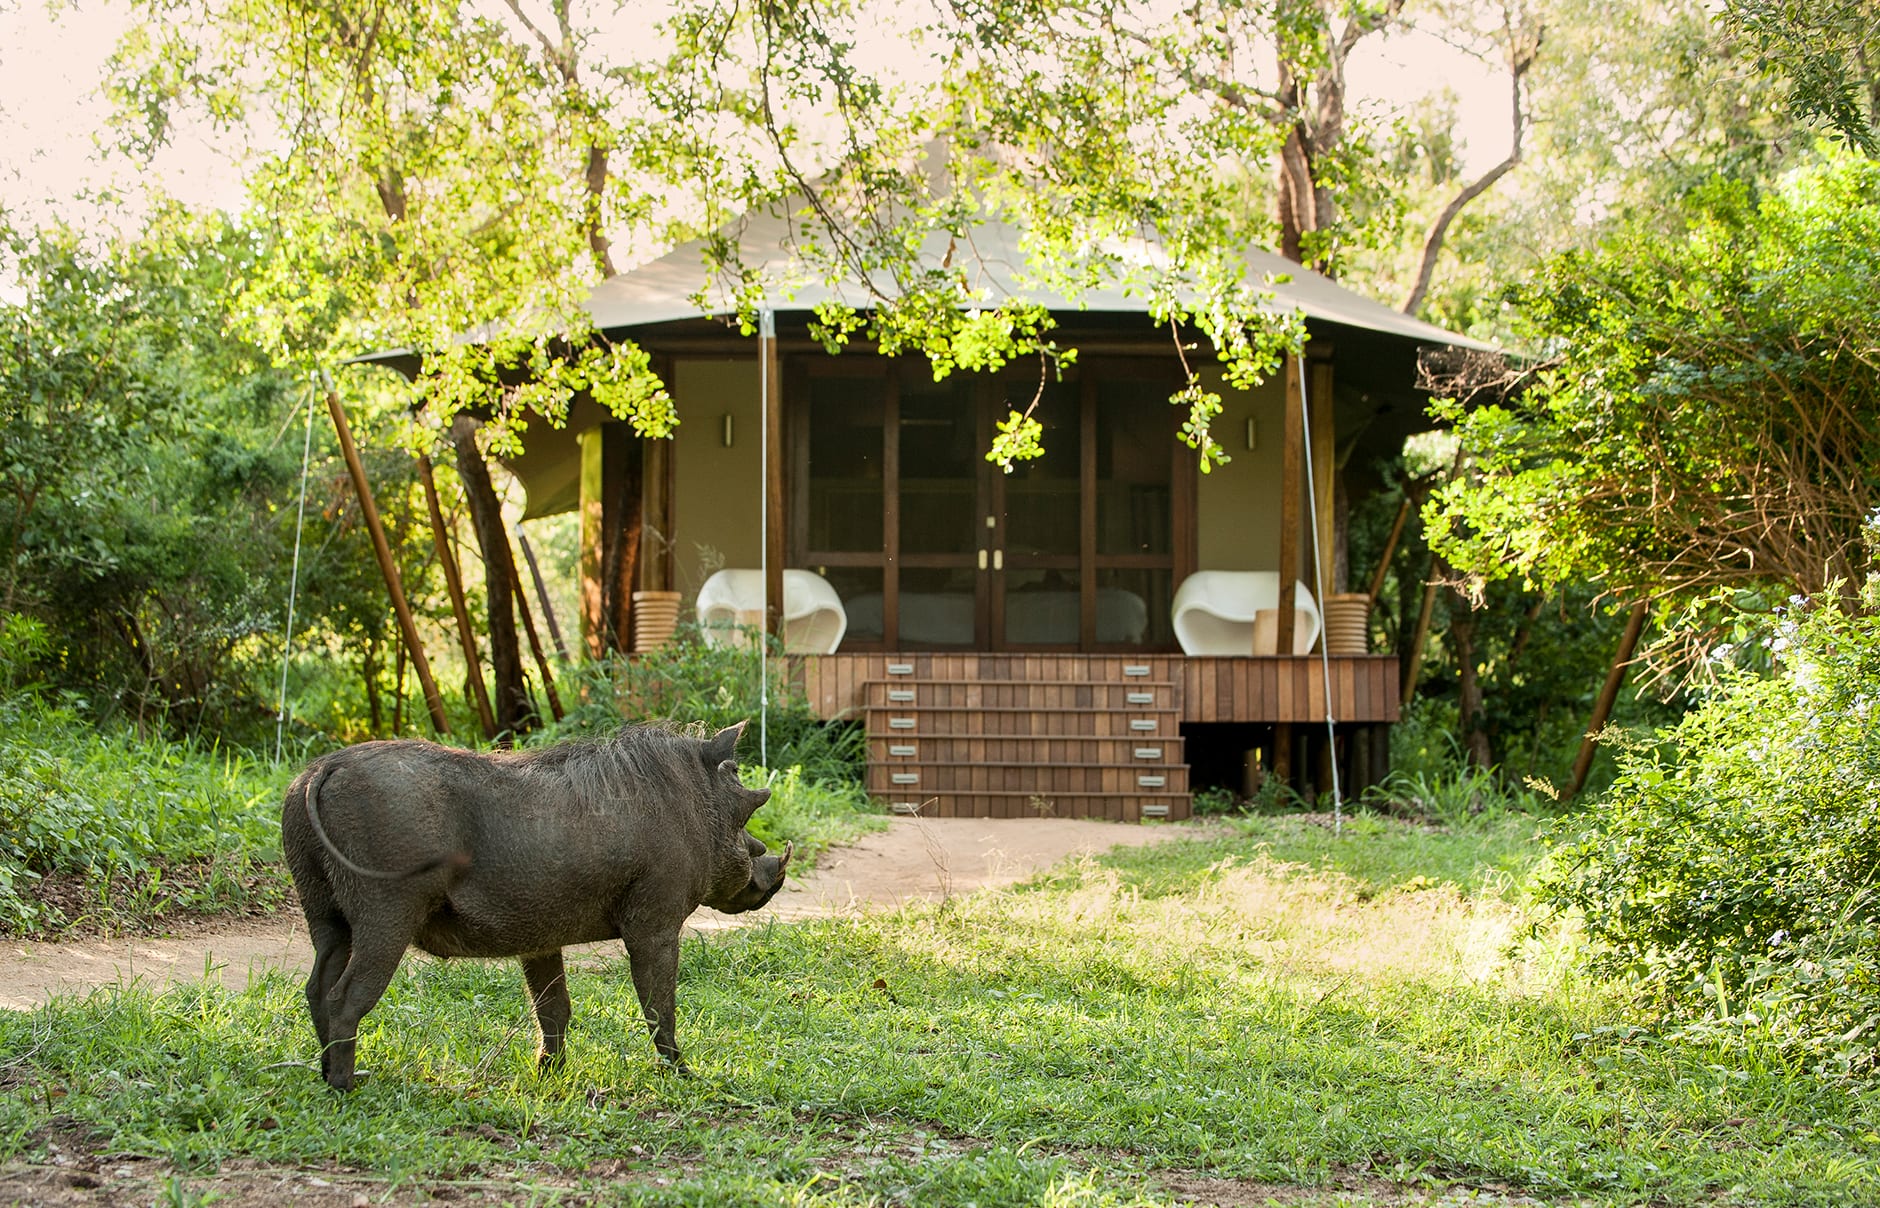 &Beyond Ngala Tented Camp, Kruger National Park, South Africa. Review by TravelPlusStyle. Photo © &Beyond